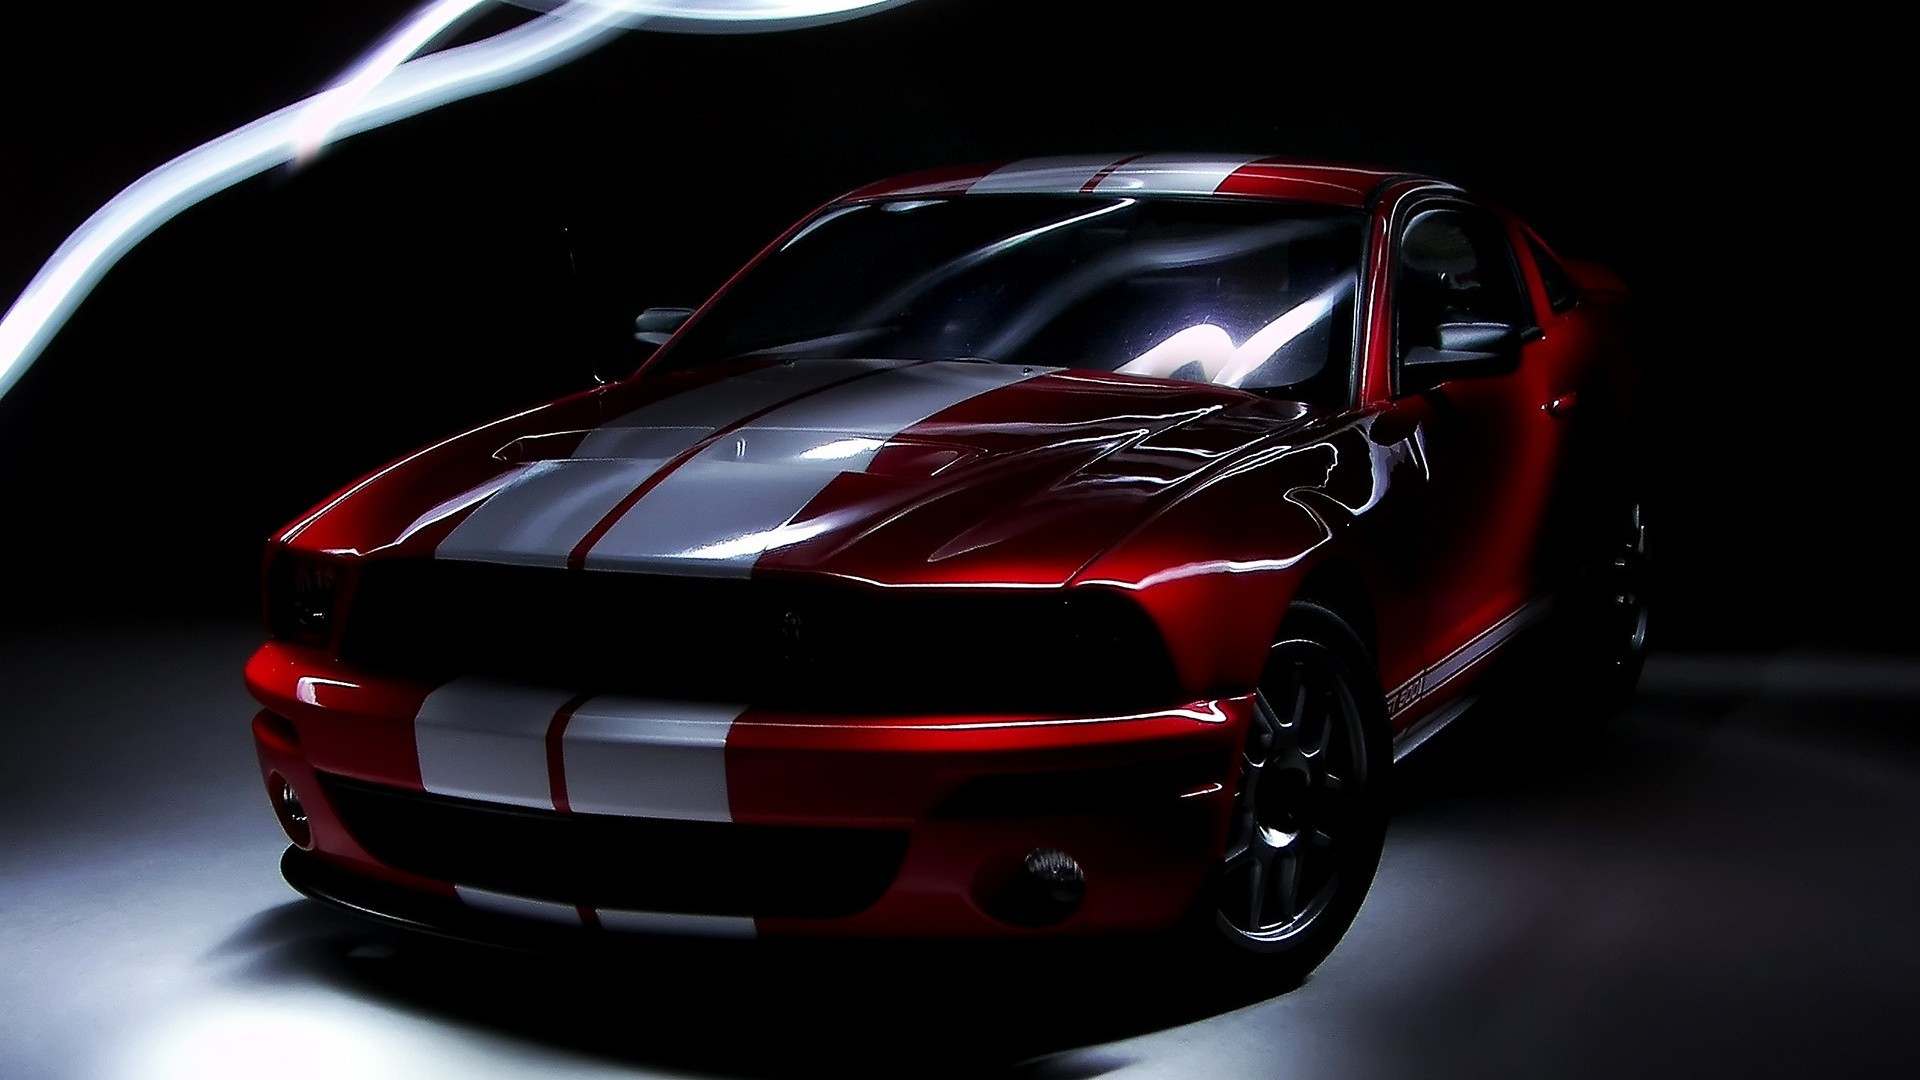 Ford Mustang, Muscle Cars, Car, American Cars, Shelby GT500 Wallpaper